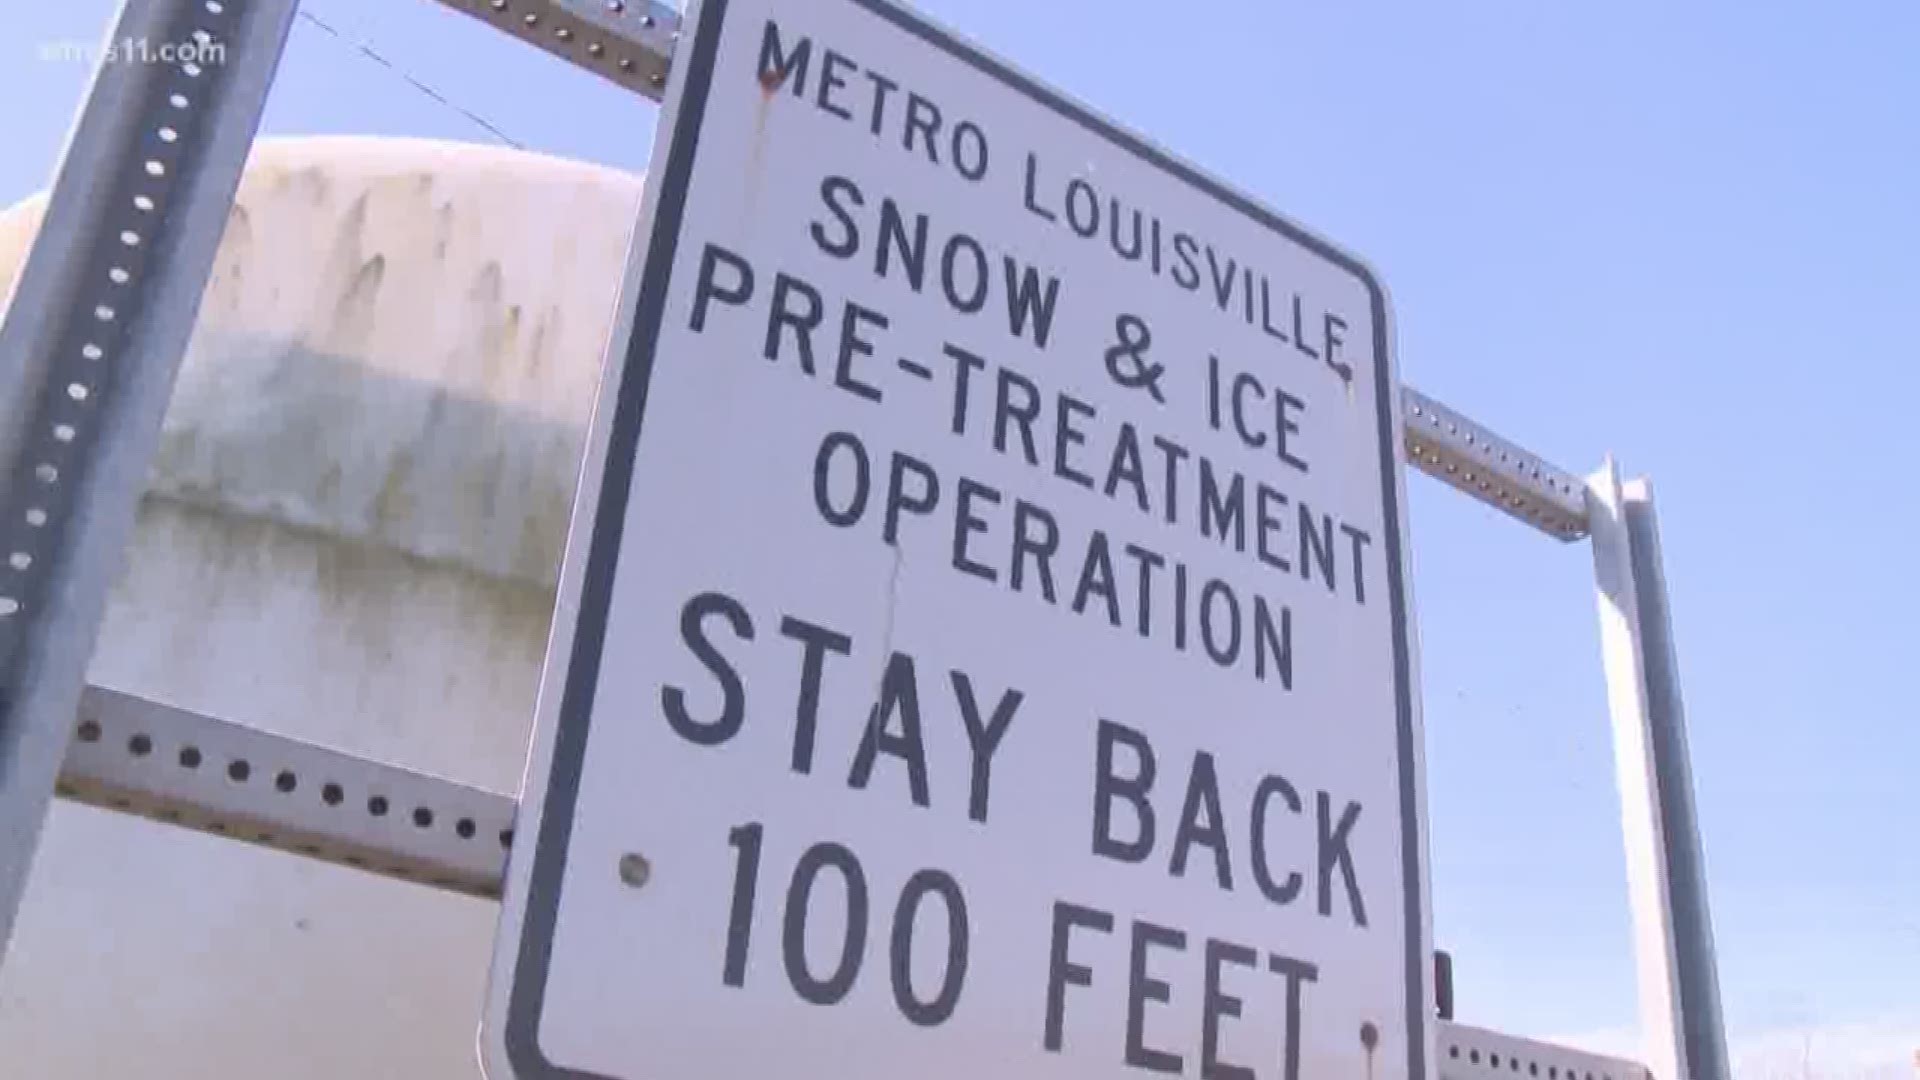 Crews have already started preparing Kentuckiana roads for possible winter weather.